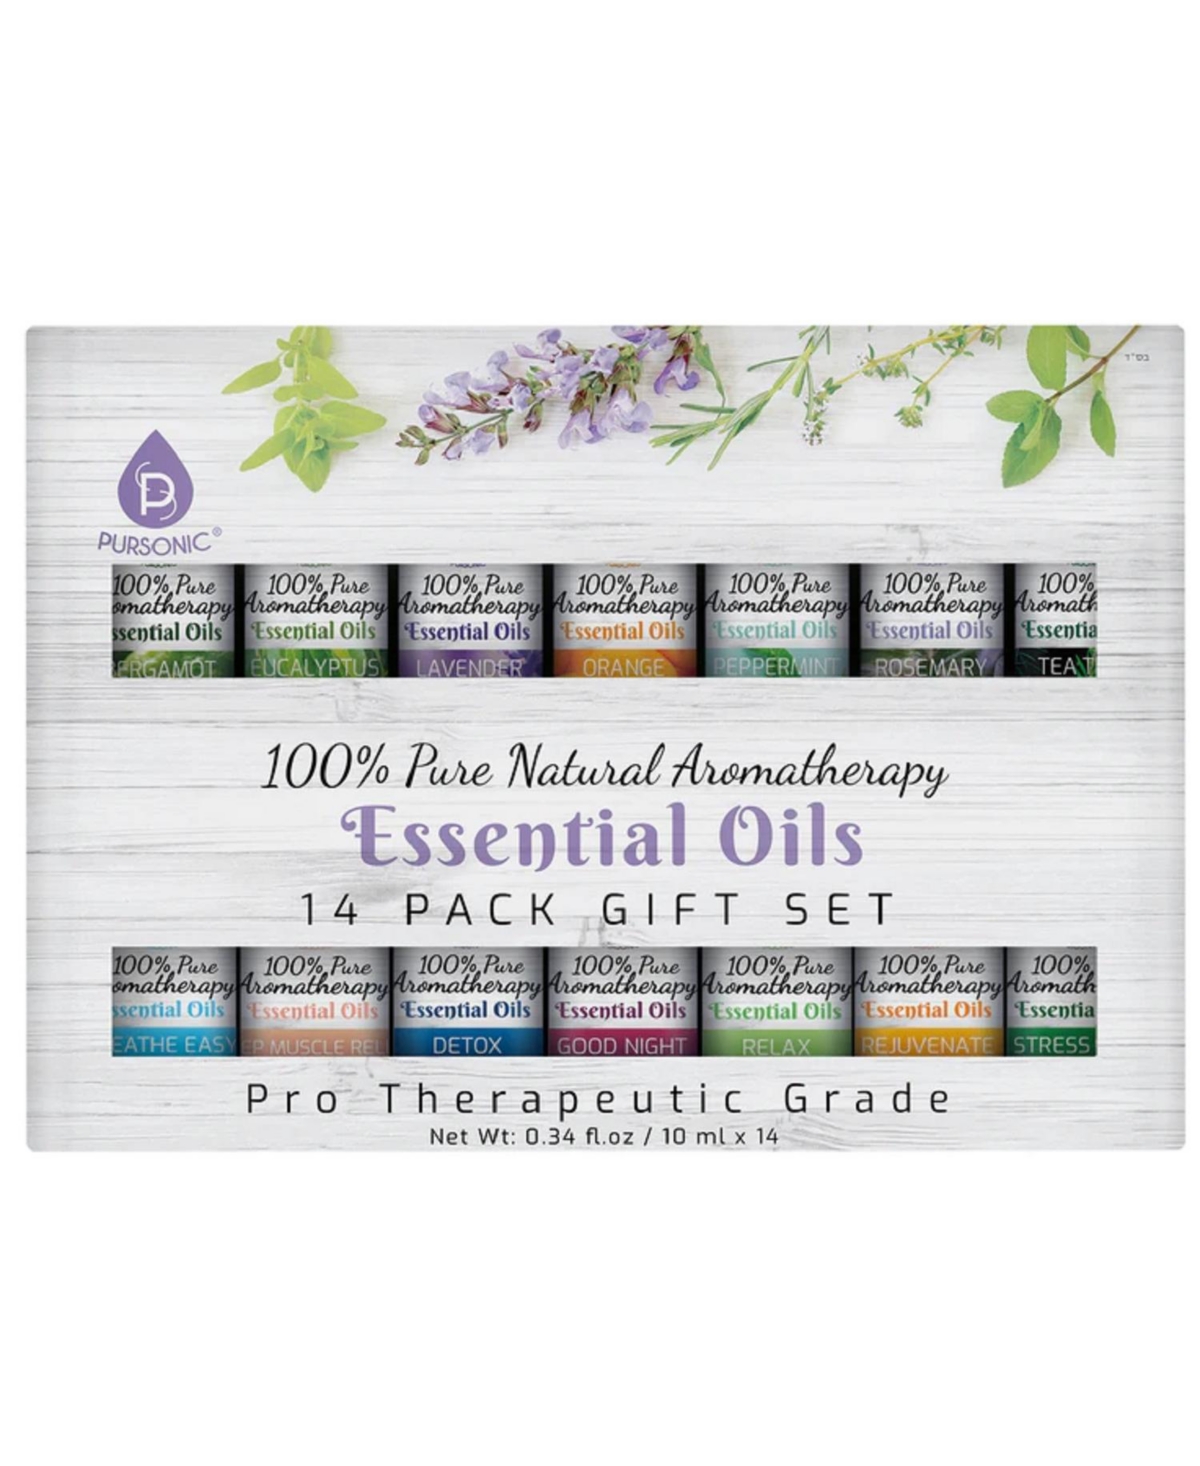 14 Pack of 100% Pure Essential Aromatherapy Oils - Natural